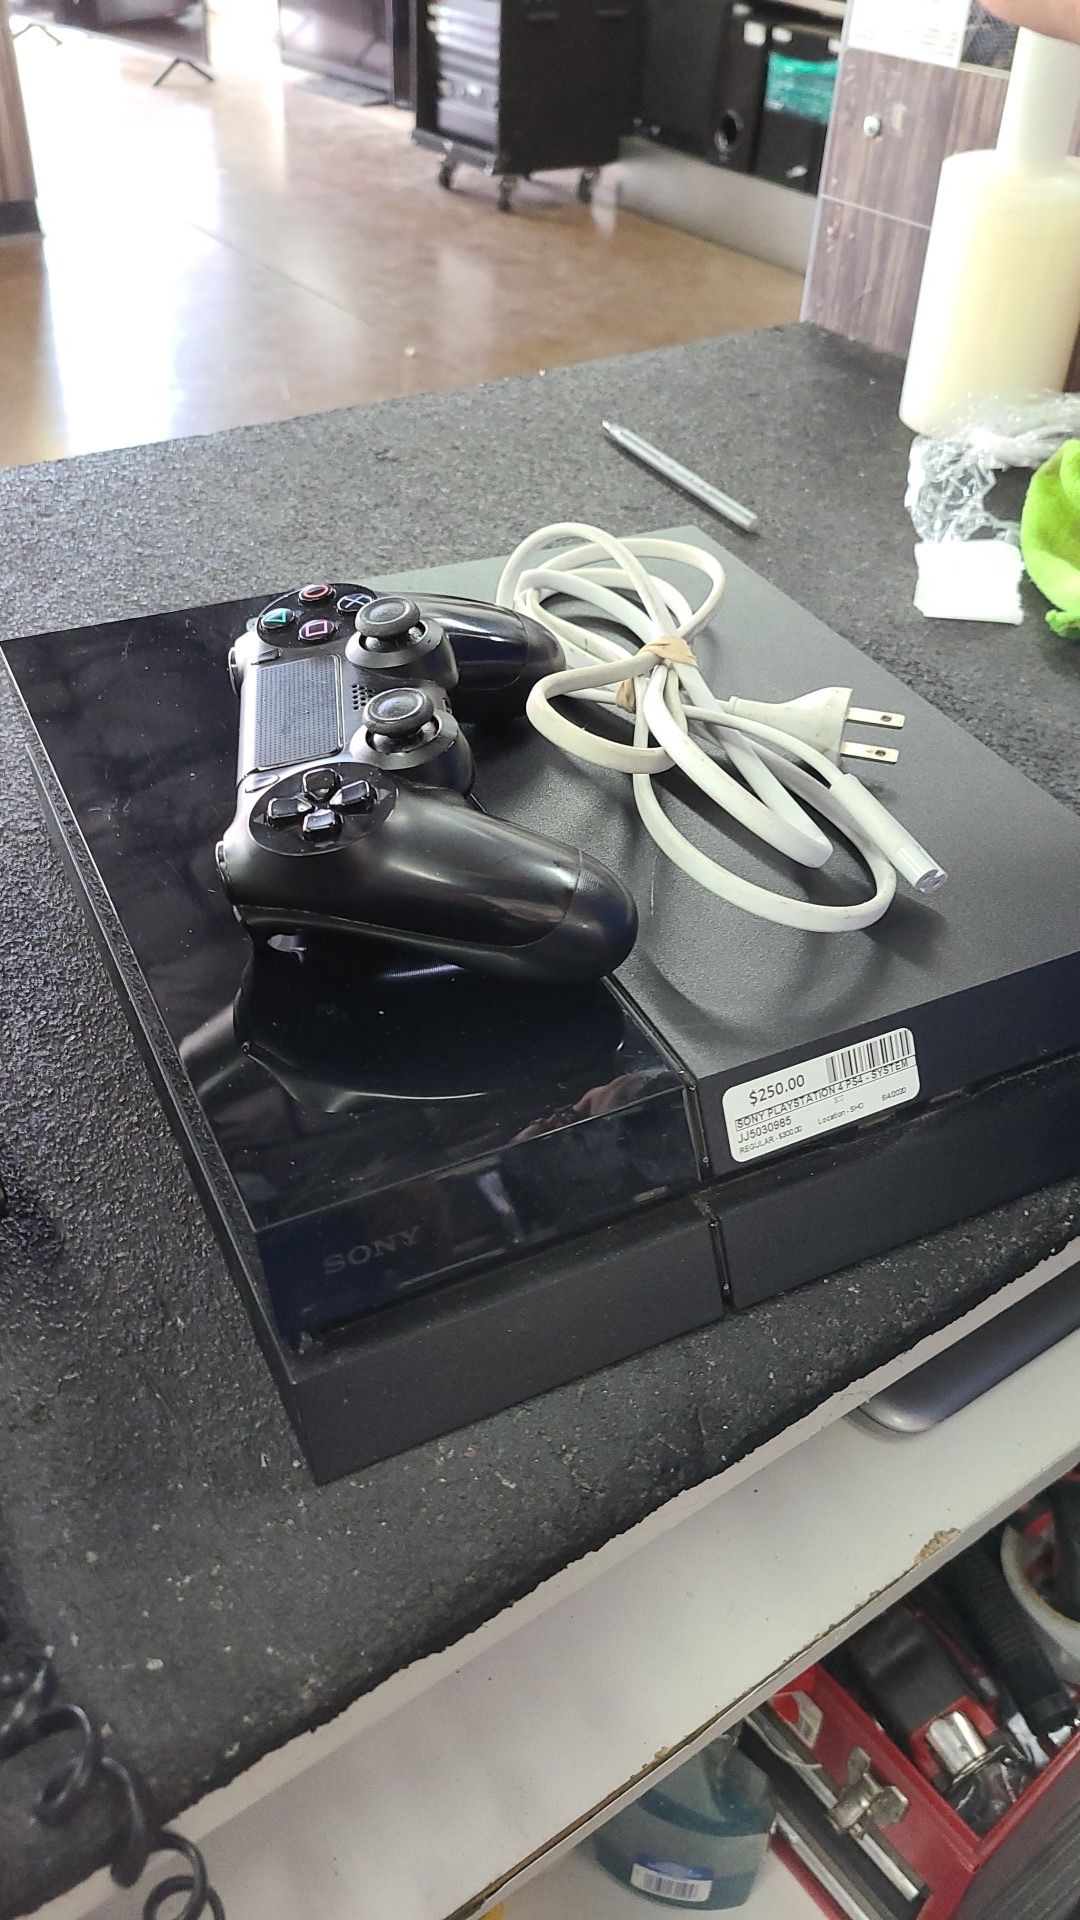 Ps4 with remote